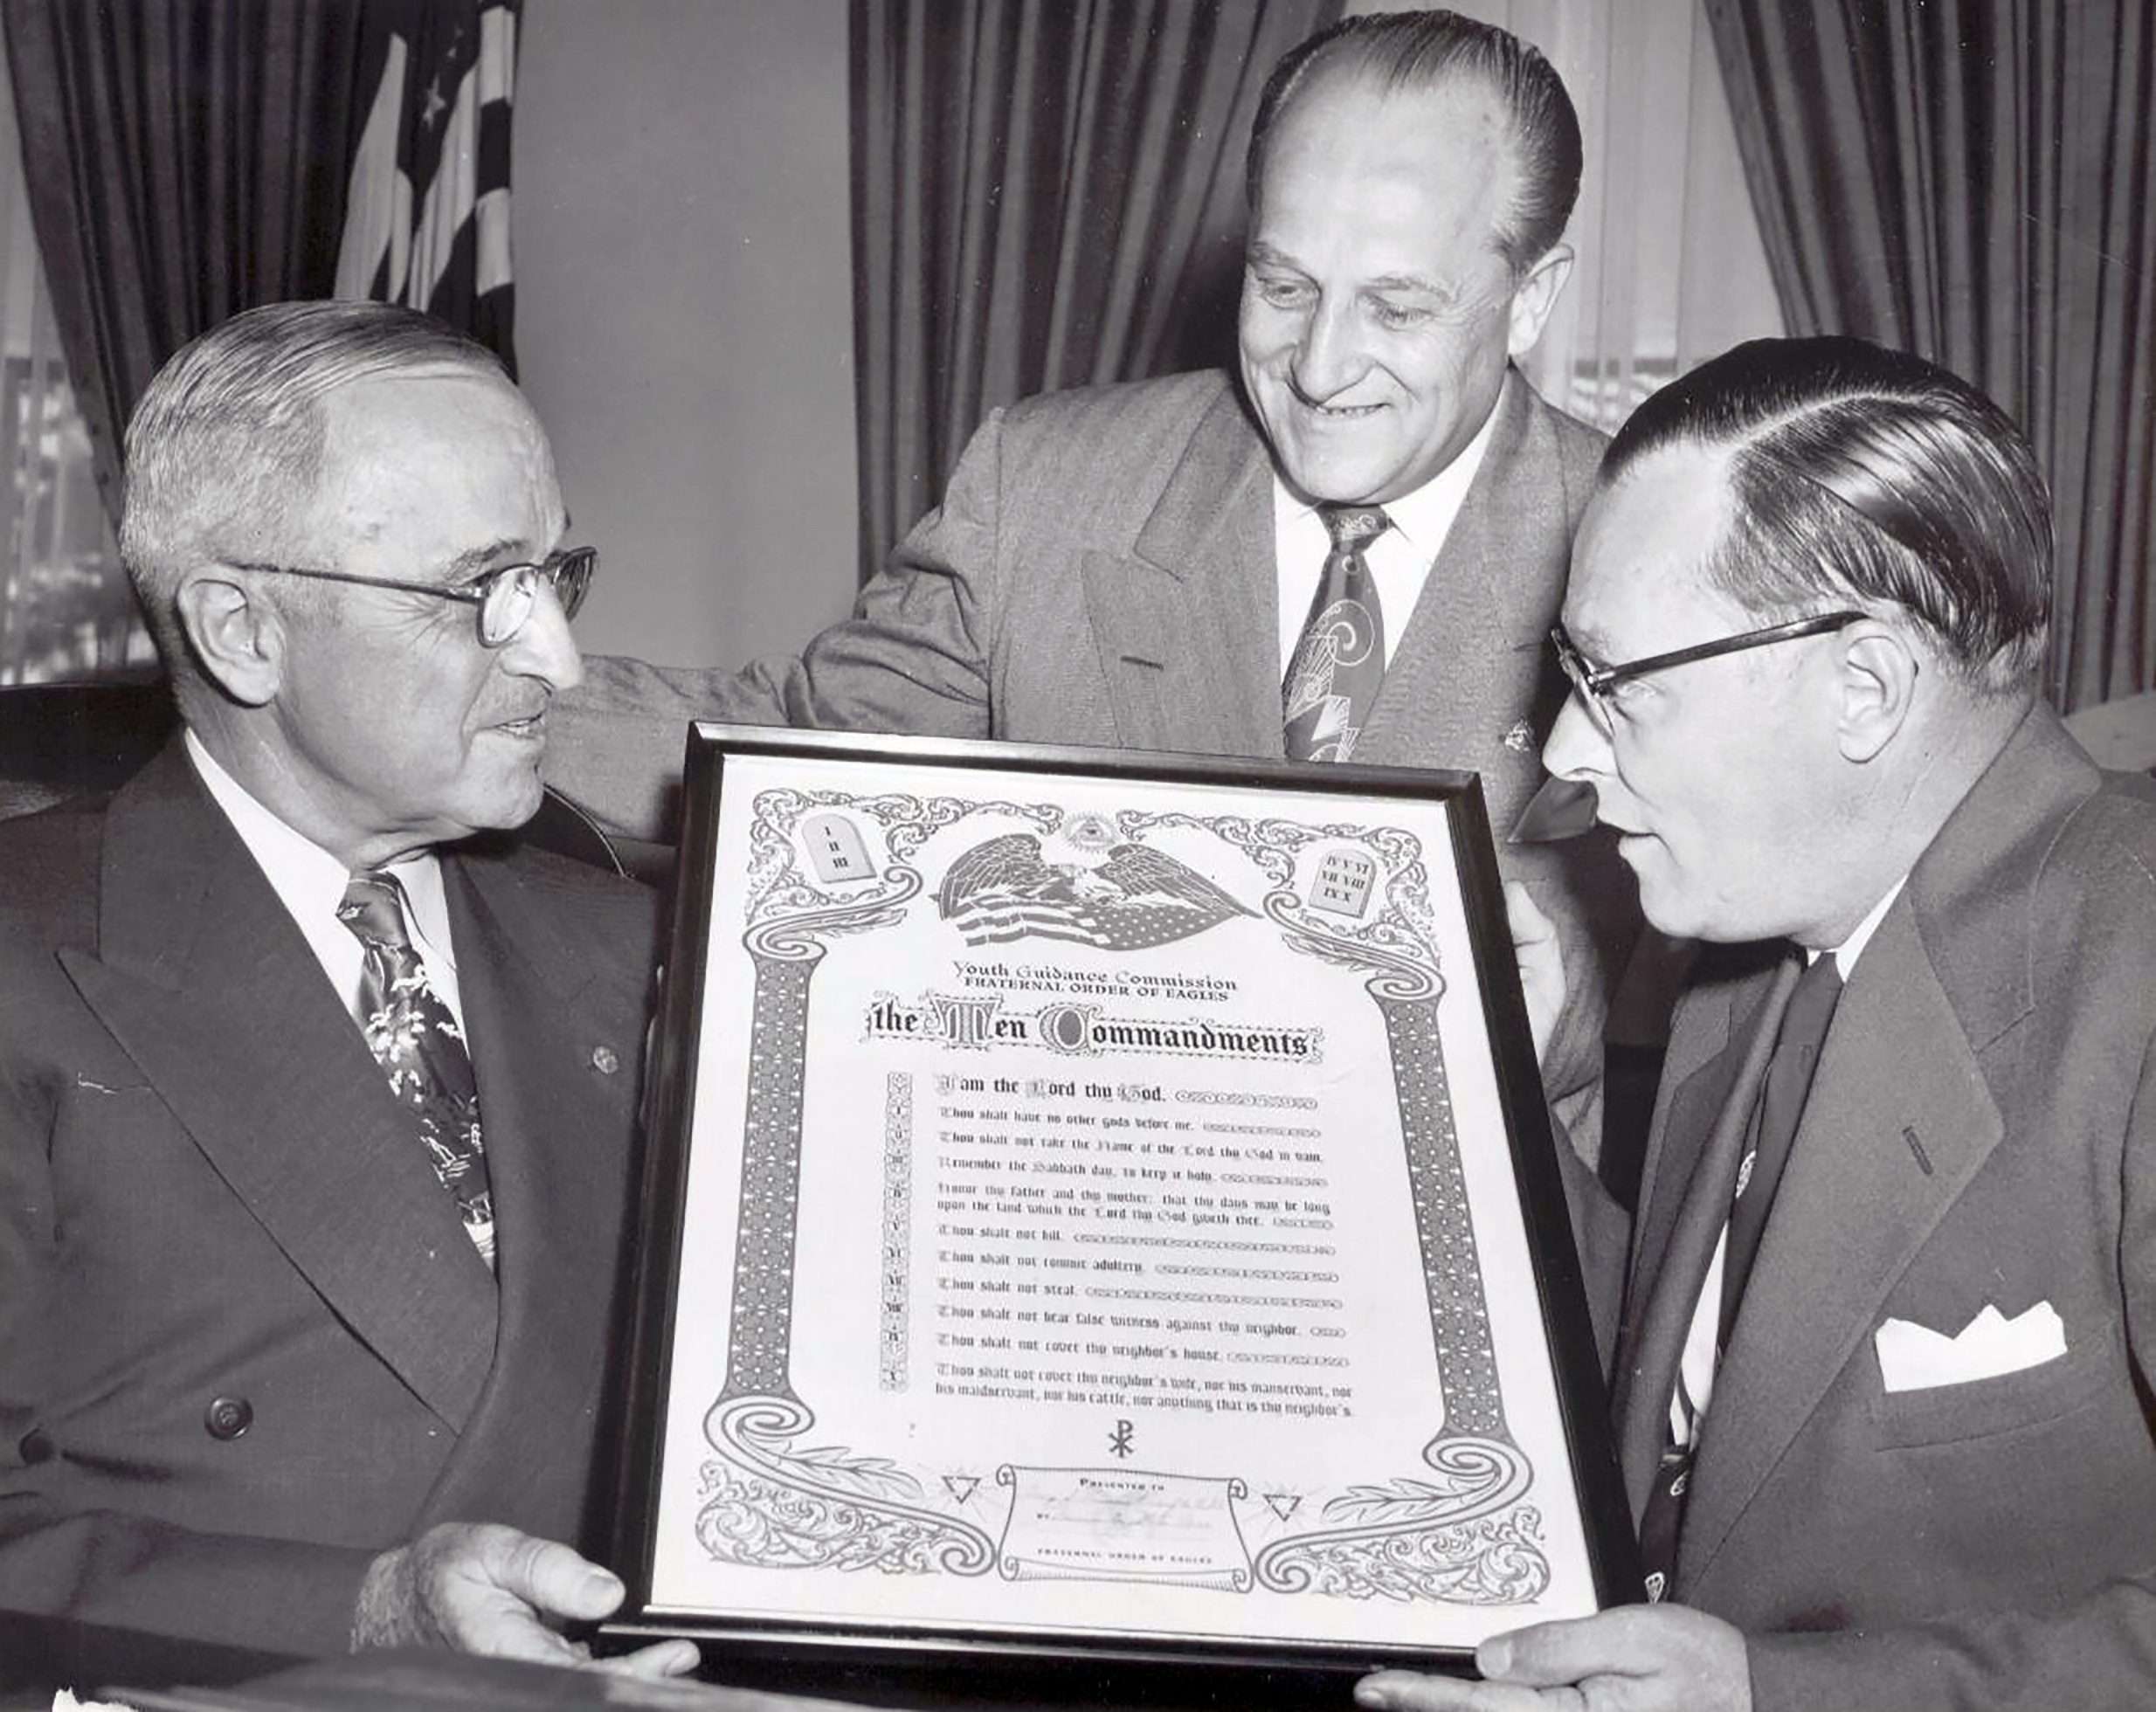 President Harry S. Truman meets with Fraternal Order of Eagles representatives to approve nationwide distribution of The Ten Commandments to combat juvenile delinquency in 1951.